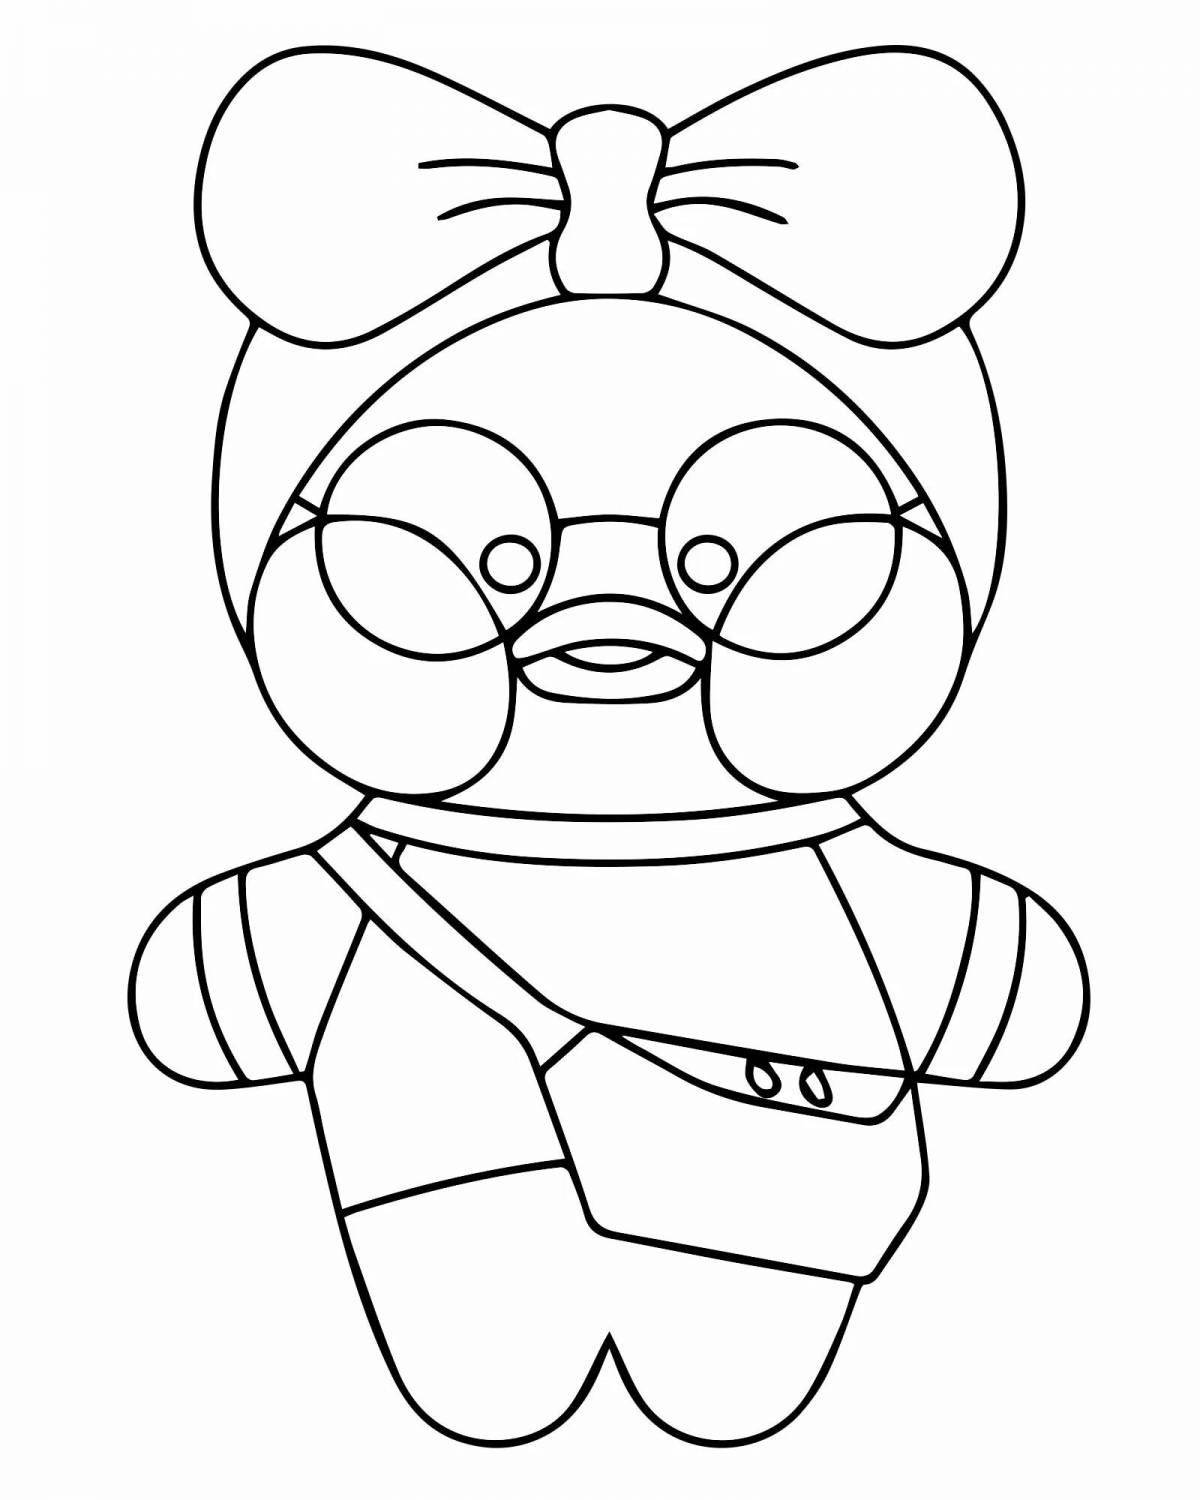 Lalafanfan happy duck coloring page